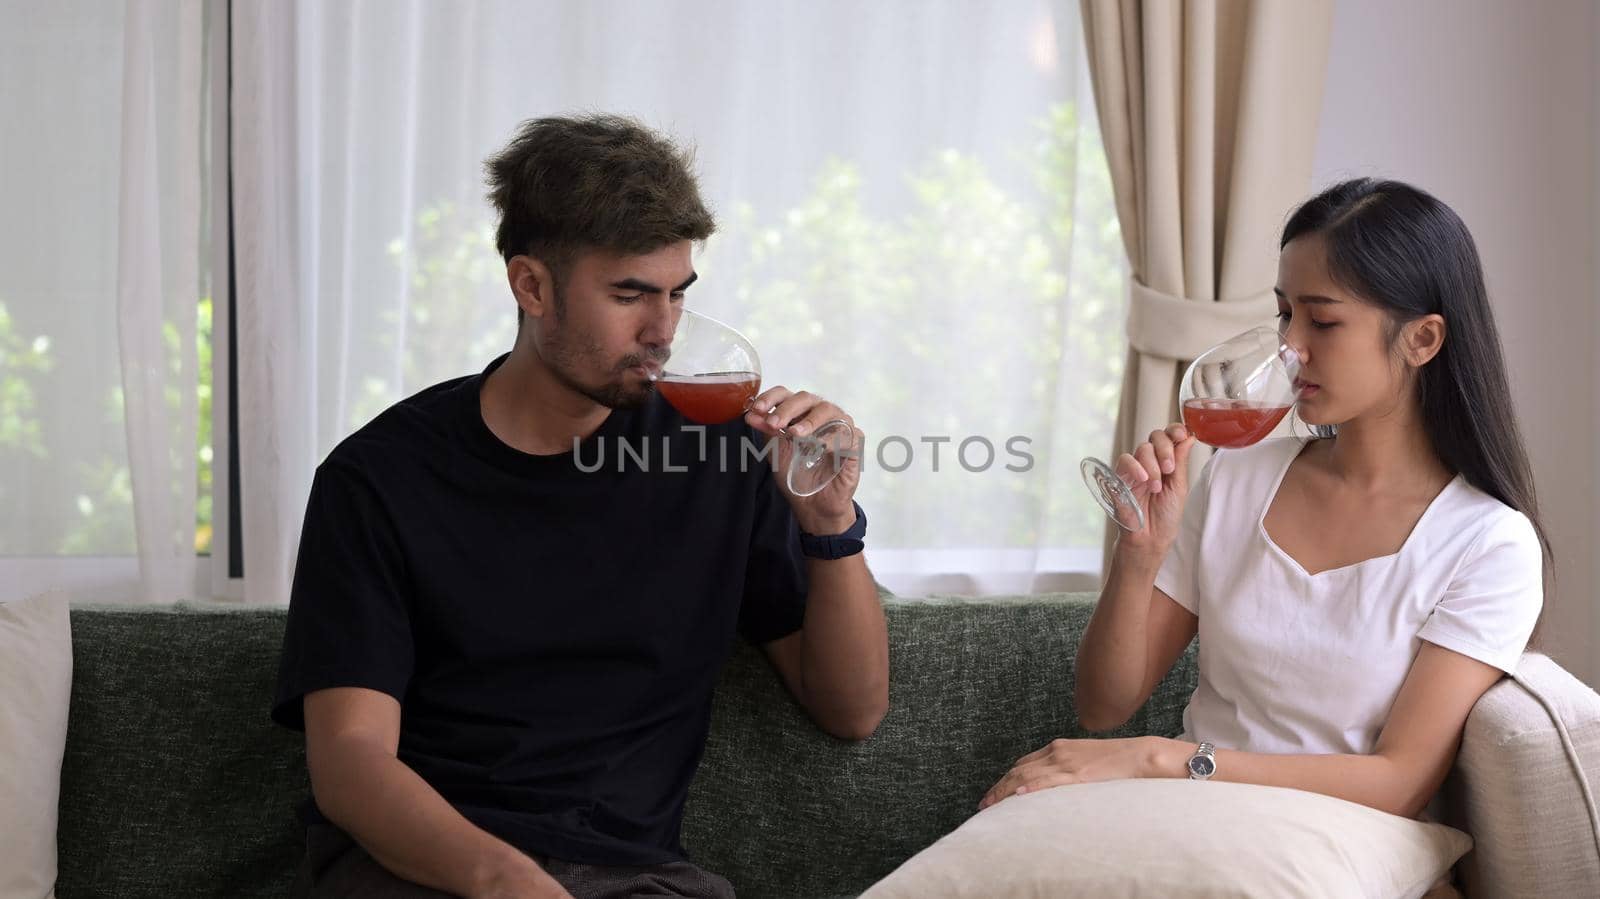 Happy couple resting on sofa and drinking wine. Leisure and celebration concept.